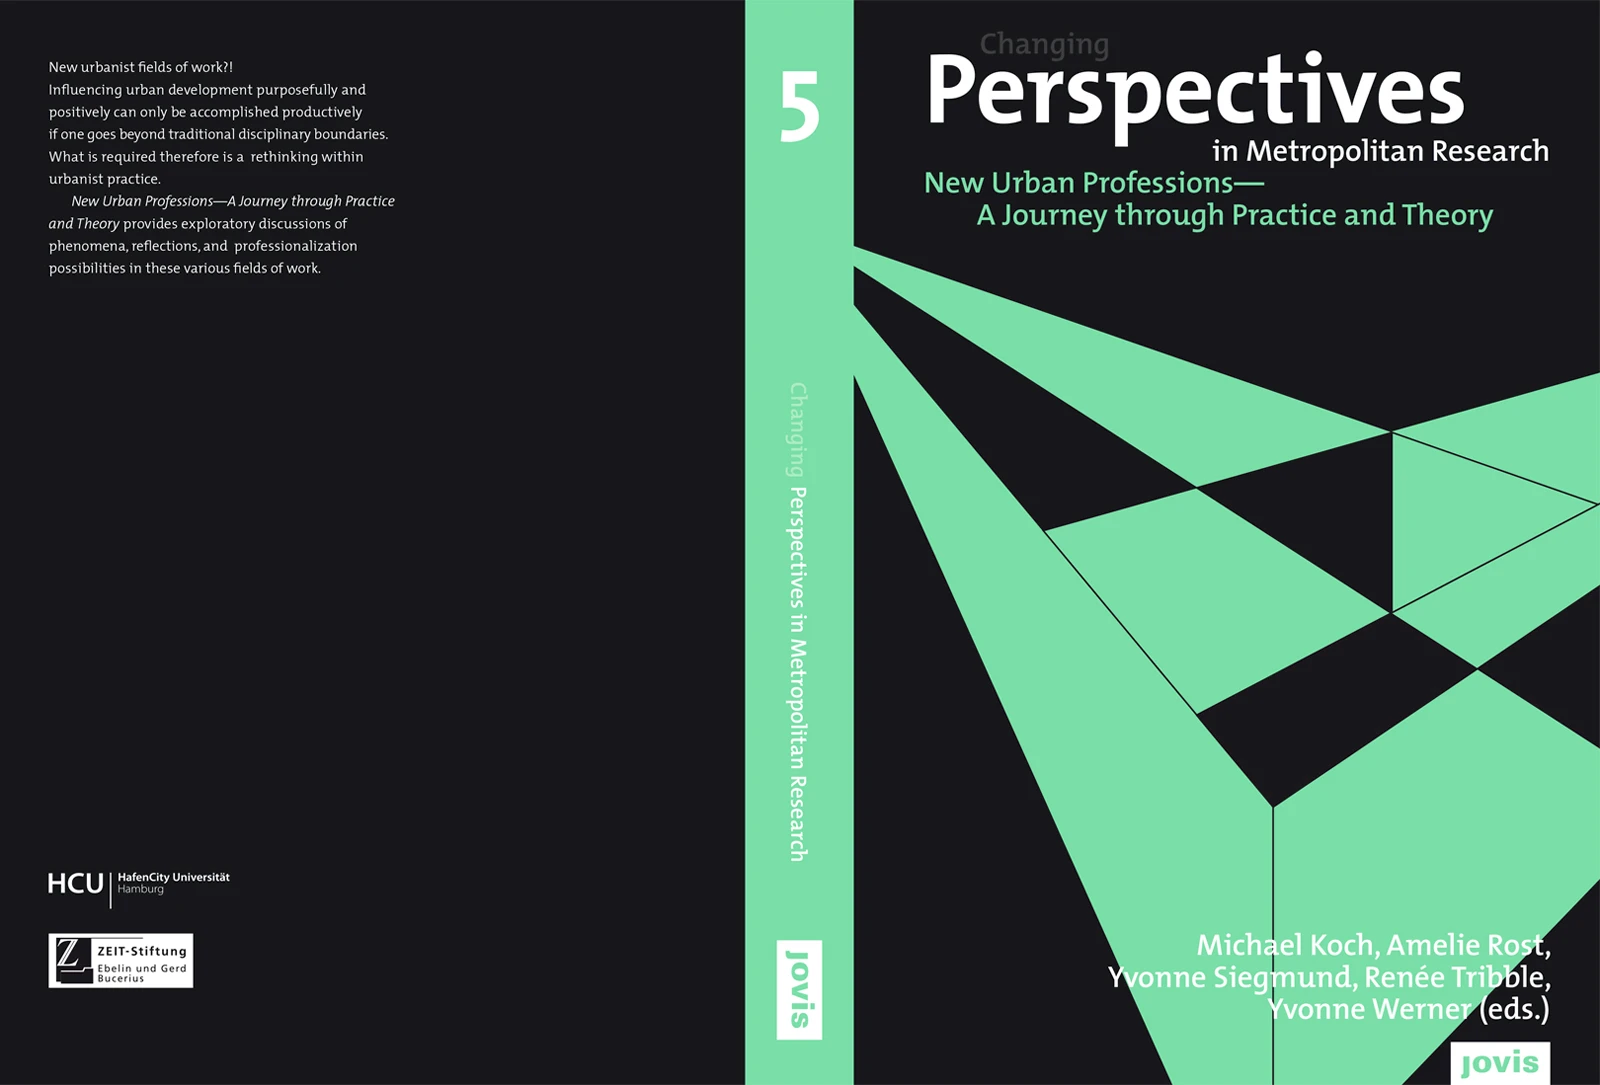 Book 'Perspectives in Metropolitan Research' — Amelie Rost